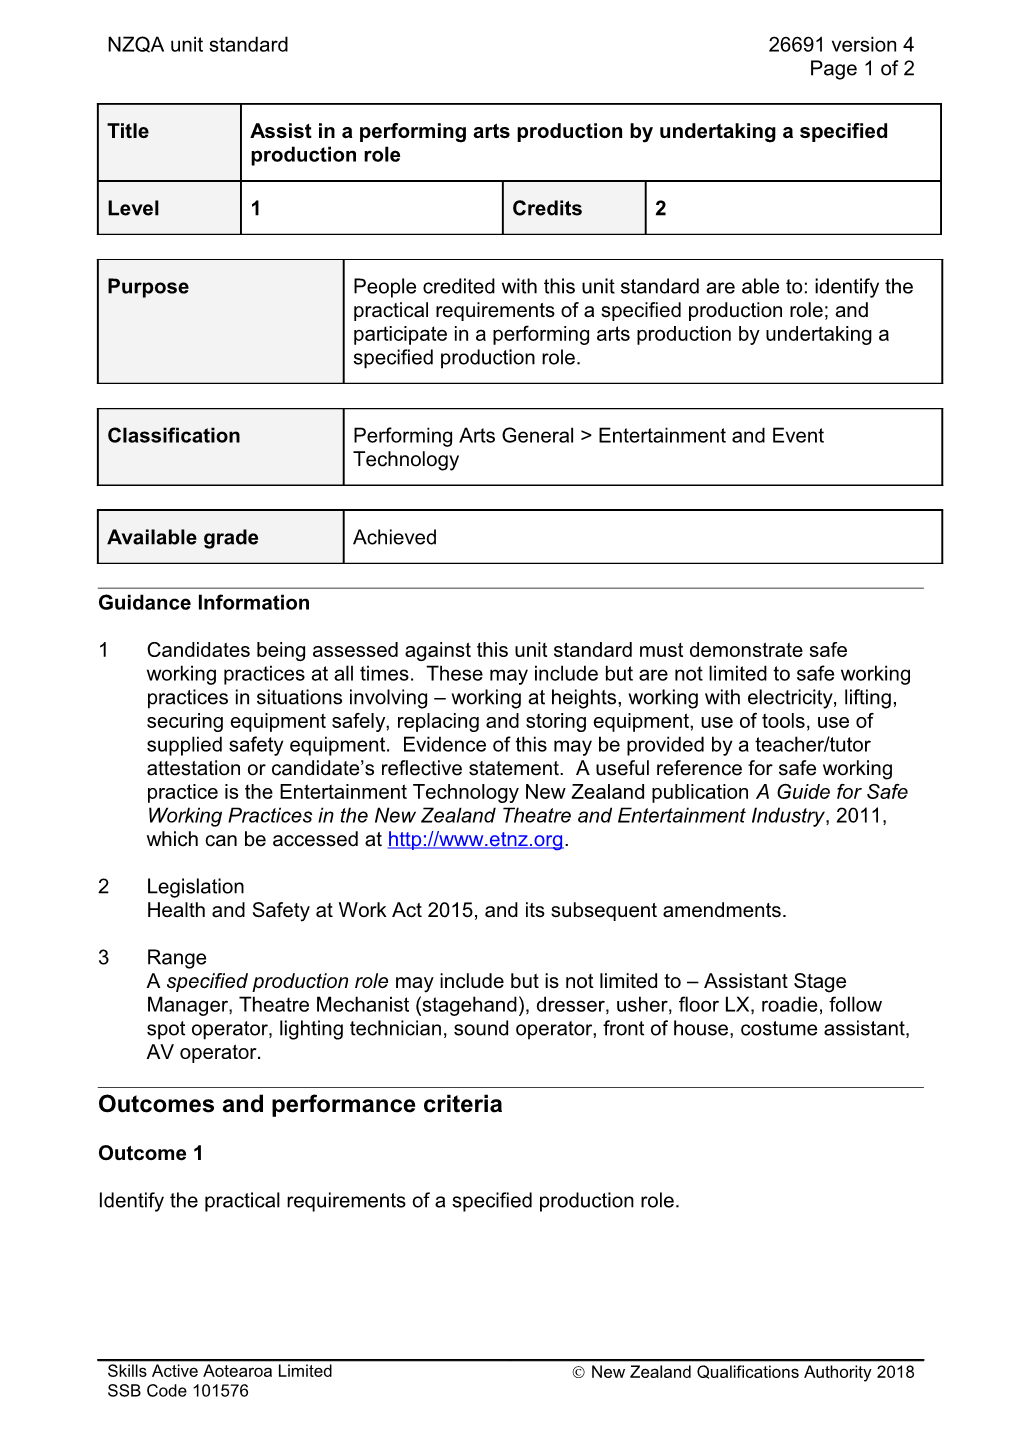 26691 Assist in a Performing Arts Production by Undertaking a Specified Production Role